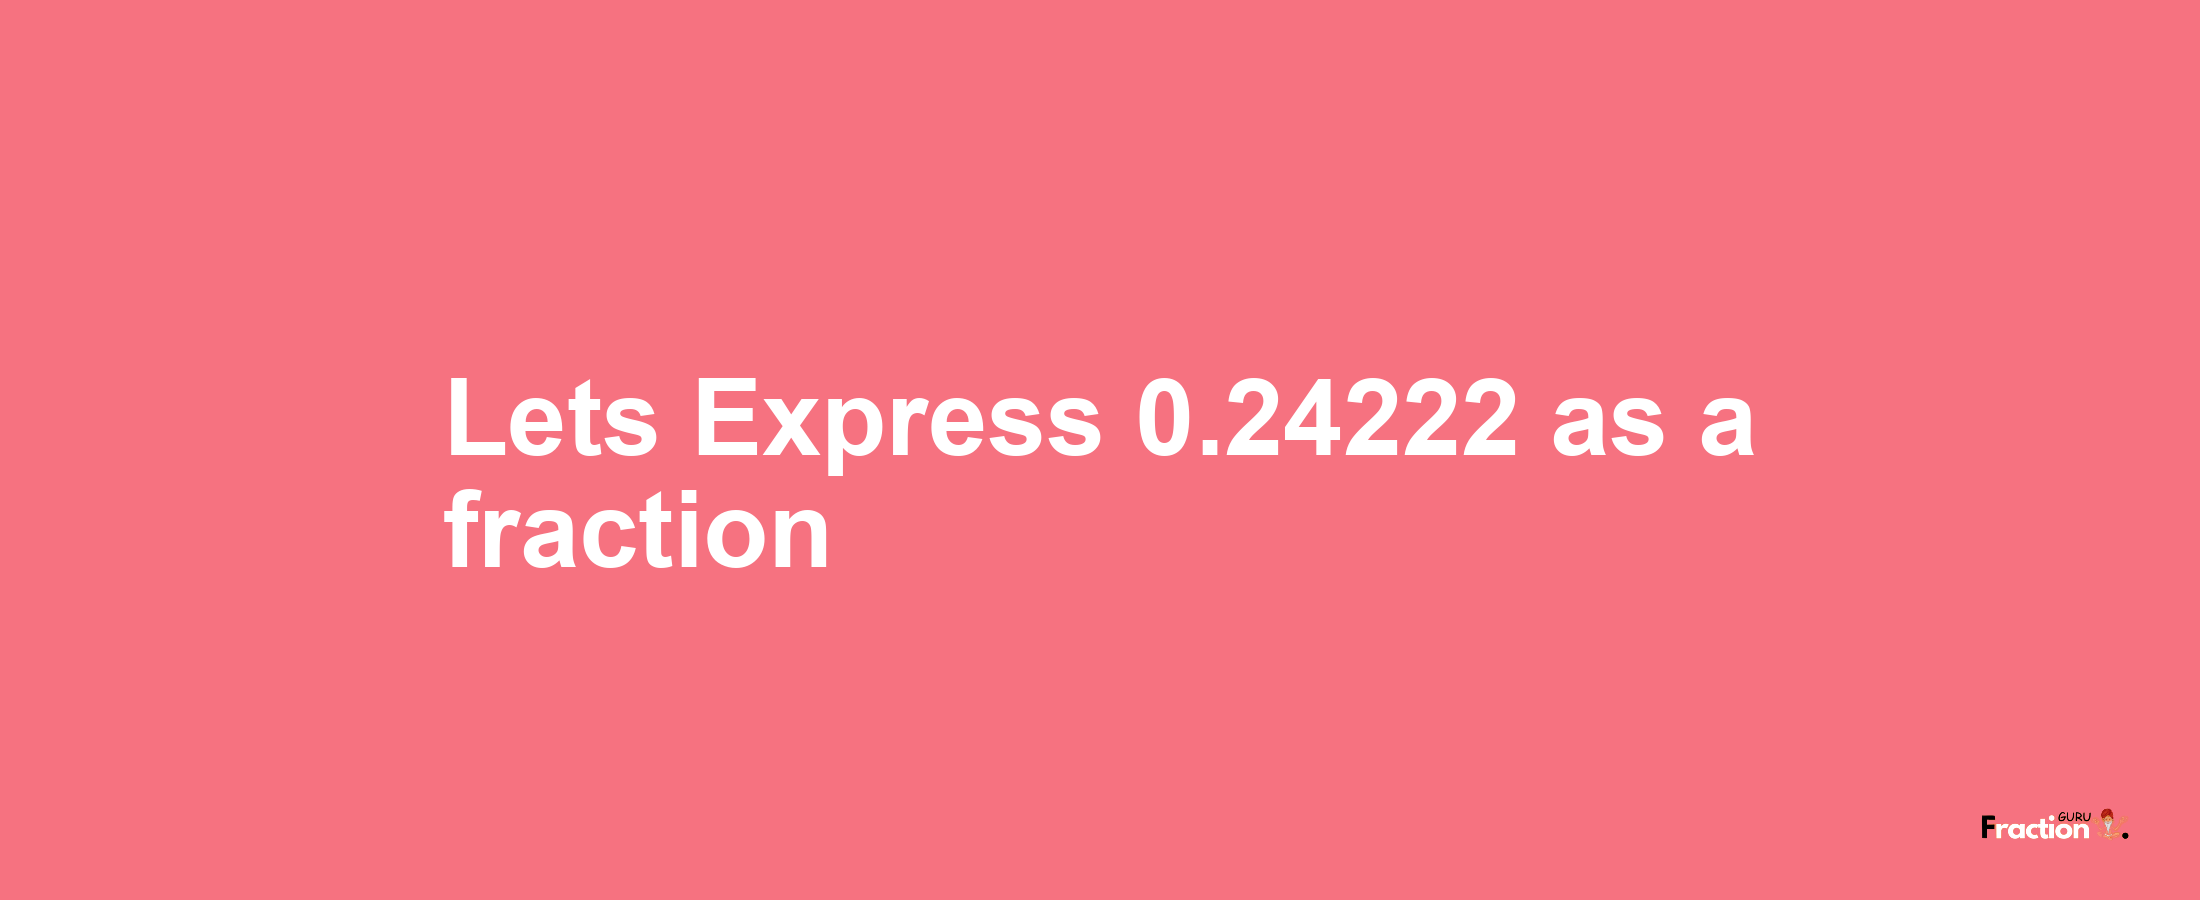 Lets Express 0.24222 as afraction